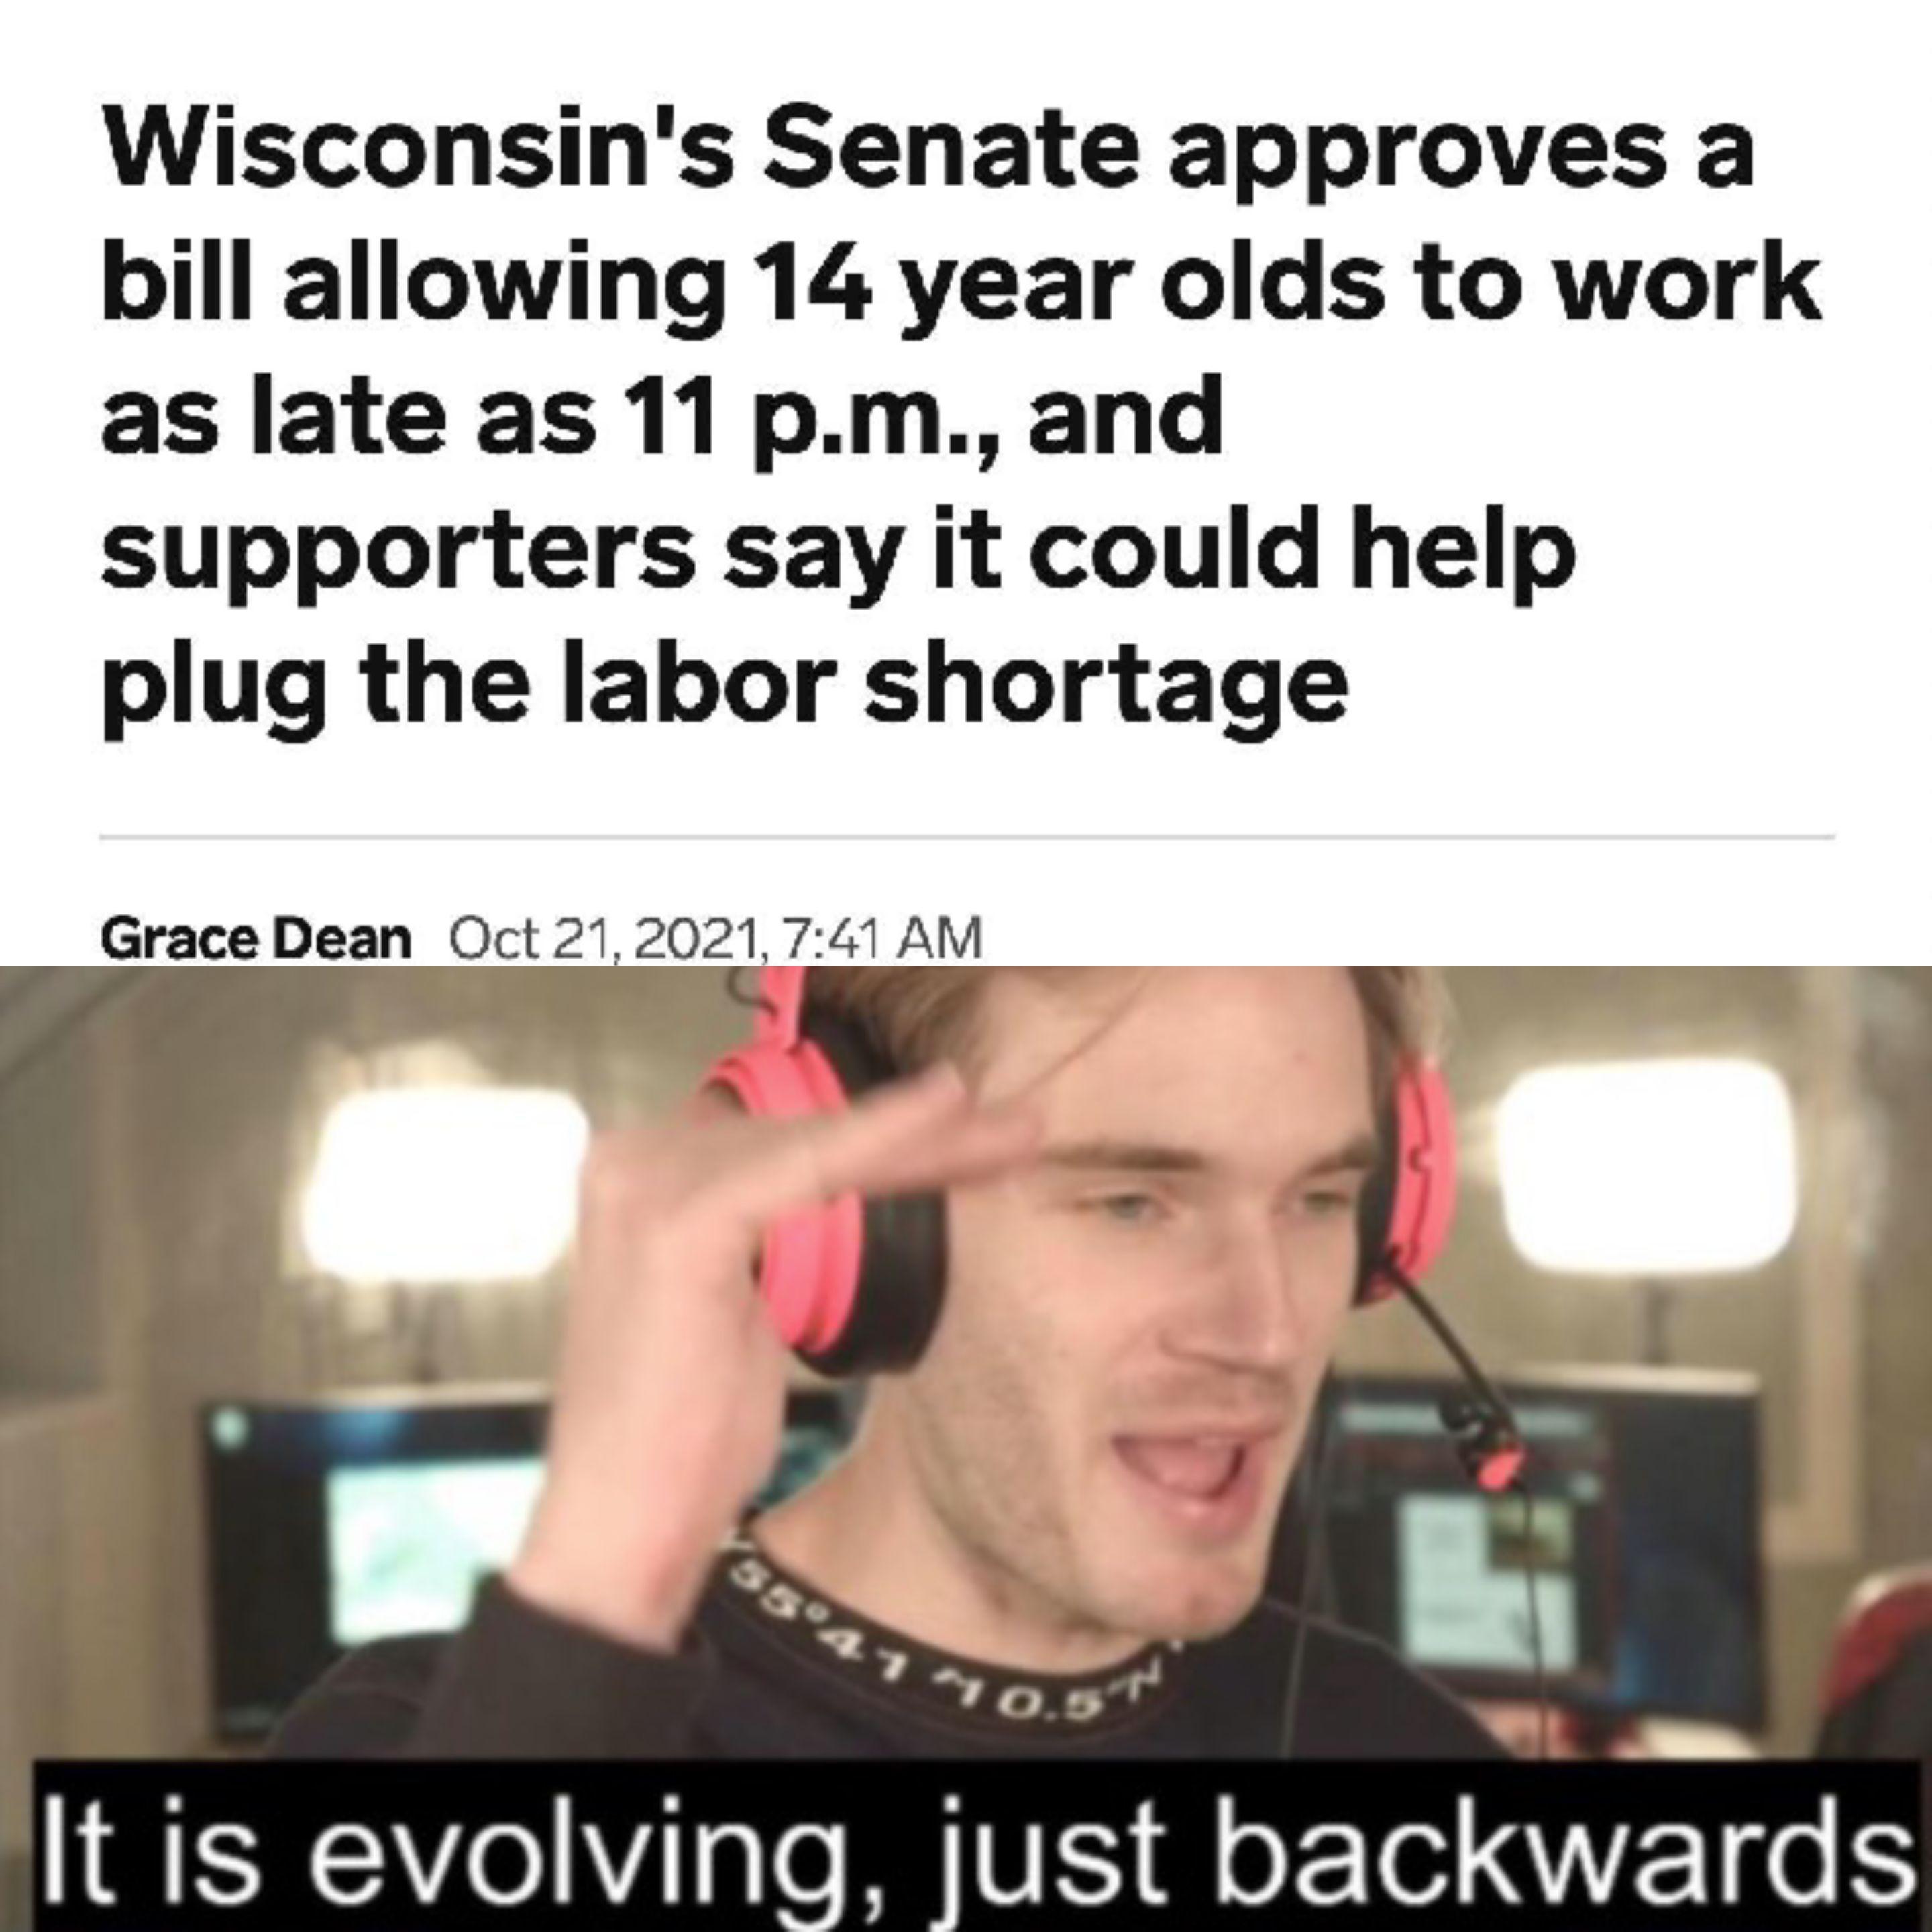 its evolving just backwards - Wisconsin's Senate approves a bill allowing 14 year olds to work as late as 11 p.m., and supporters say it could help plug the labor shortage Grace Dean , 5541"10.5" It is evolving, just backwards